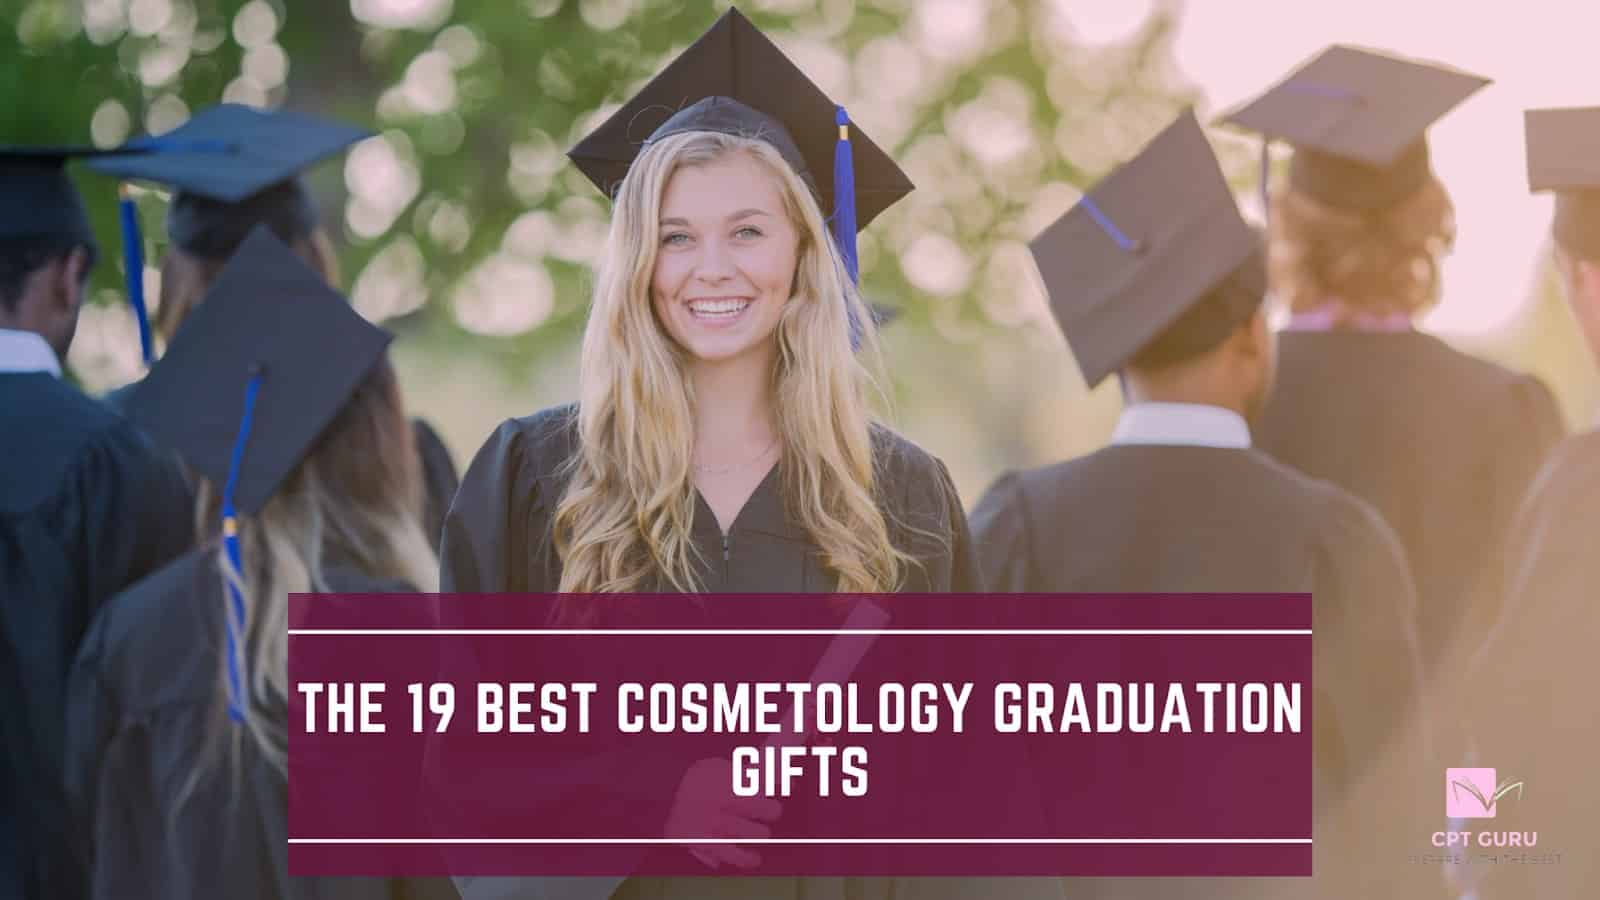 The 19 best cosmetology graduation gifts